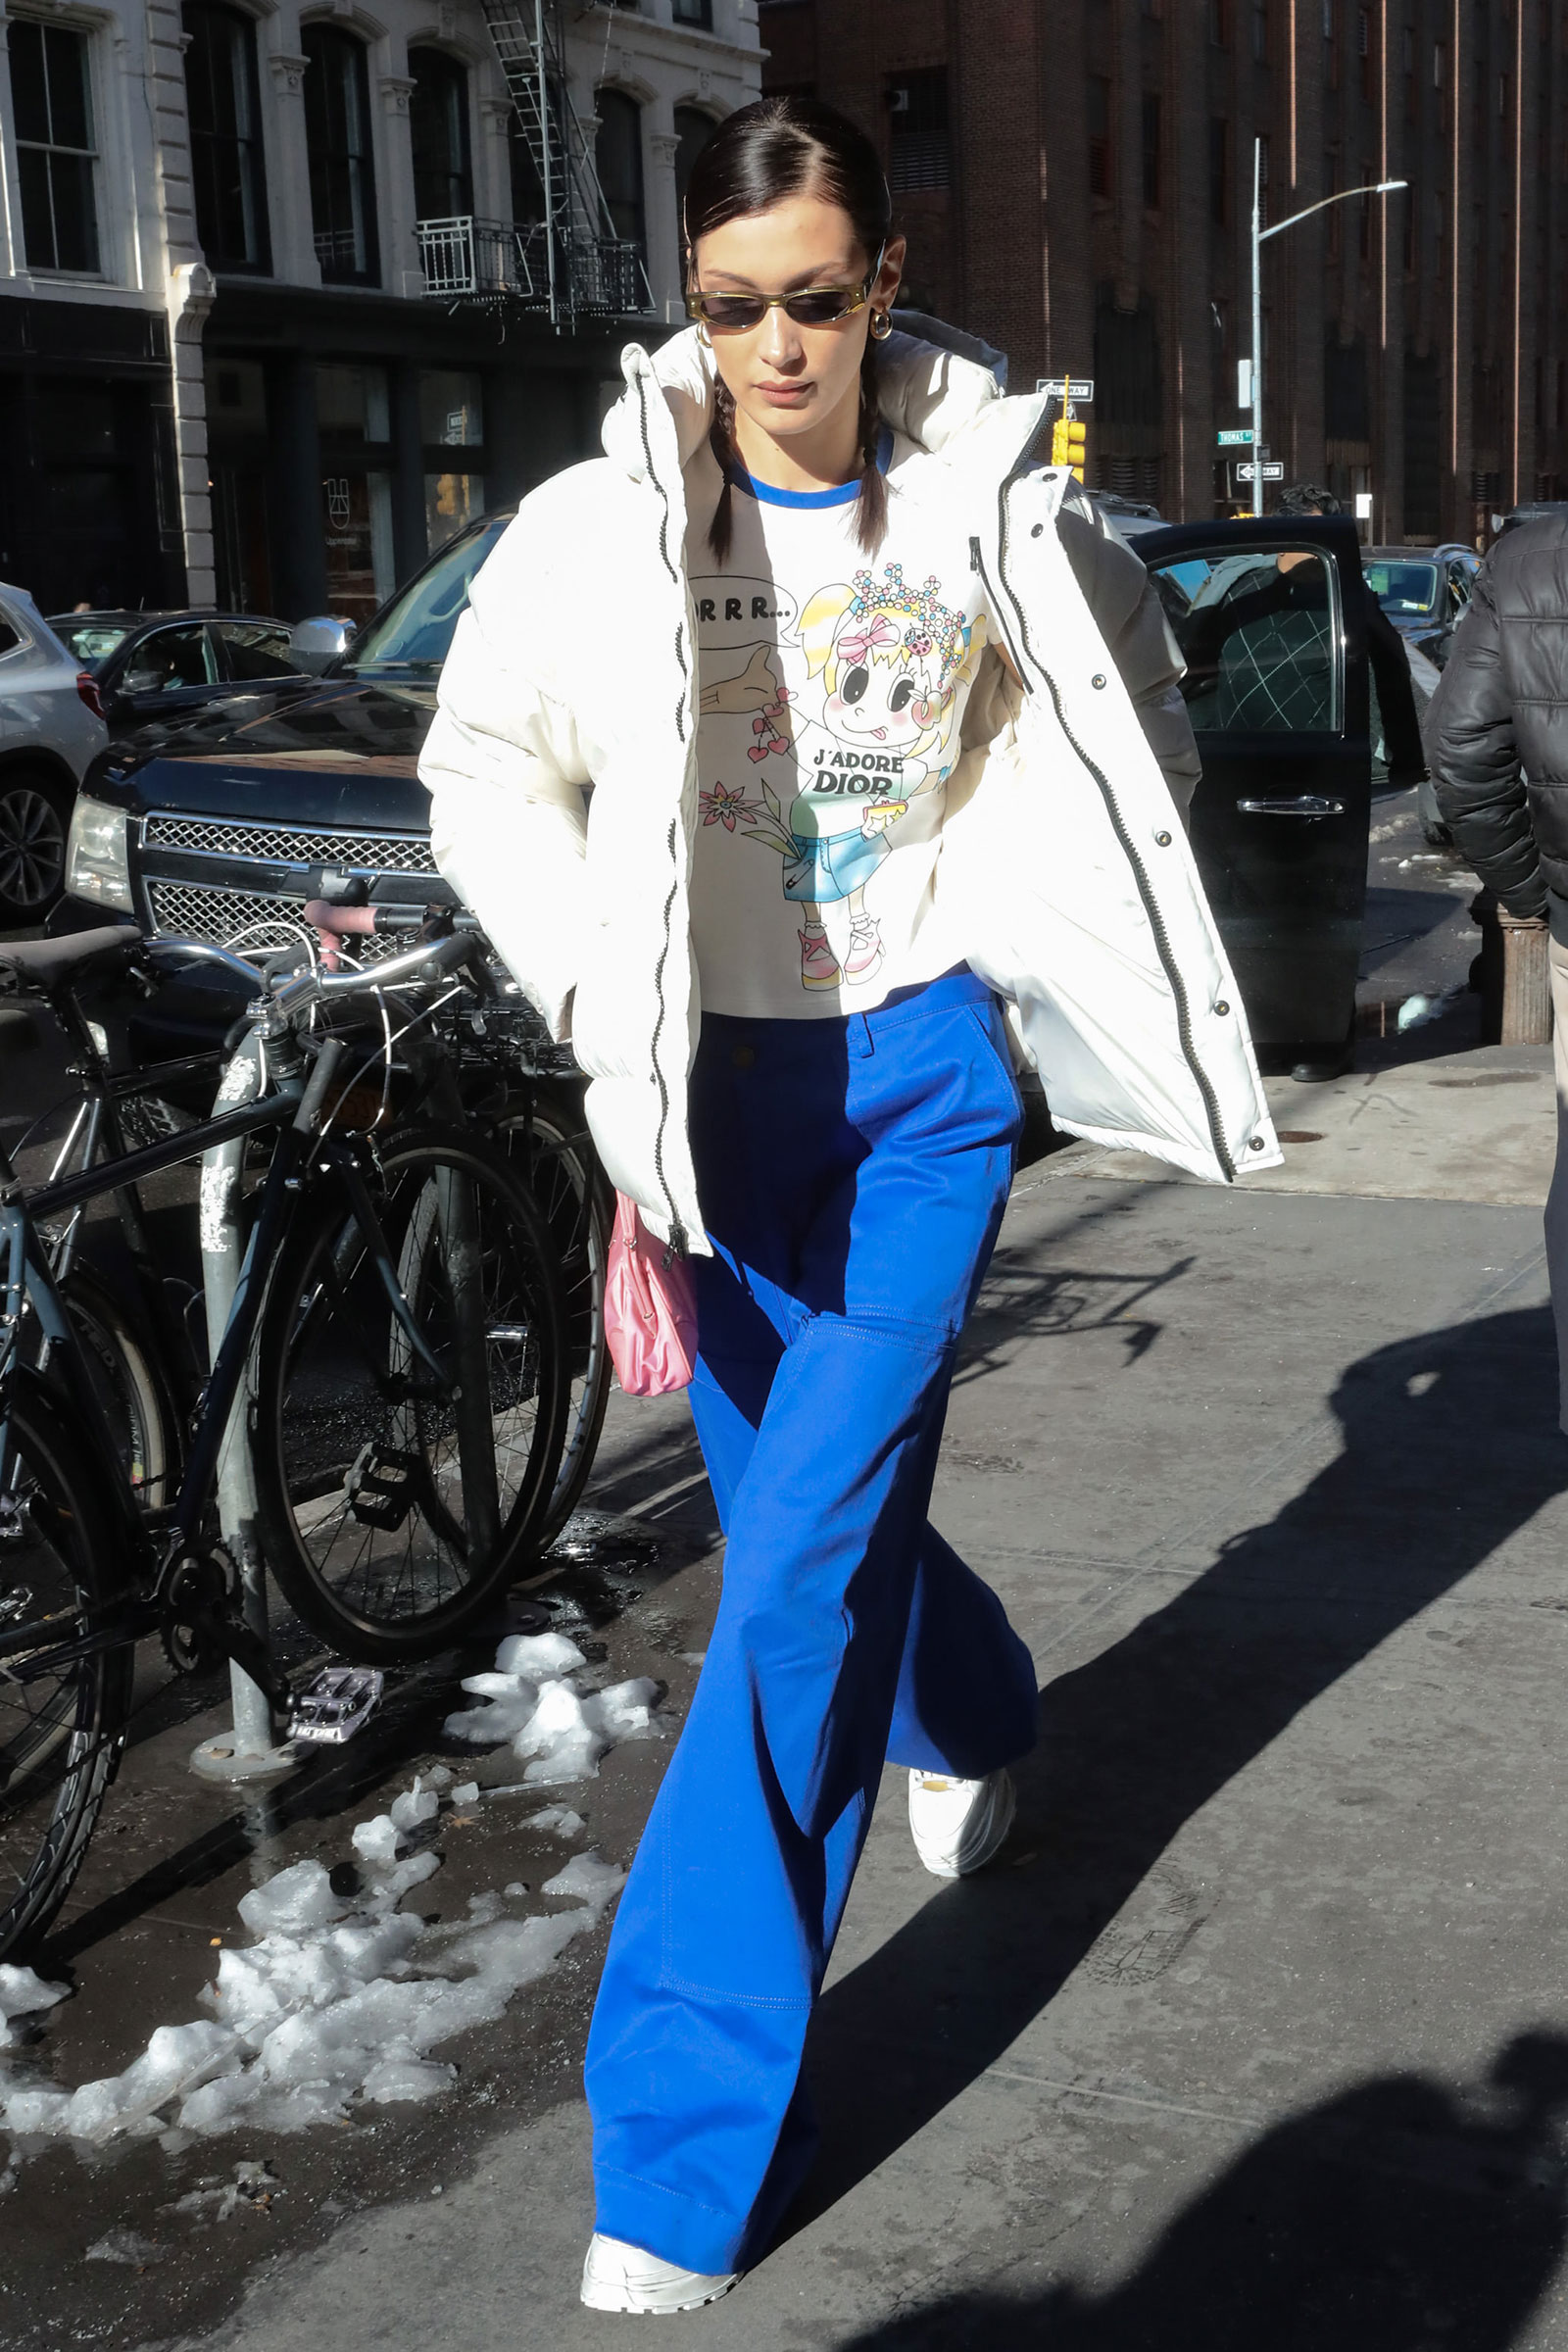 Bella Hadid's white puffer coat, blue pants and platform sneakers look for less